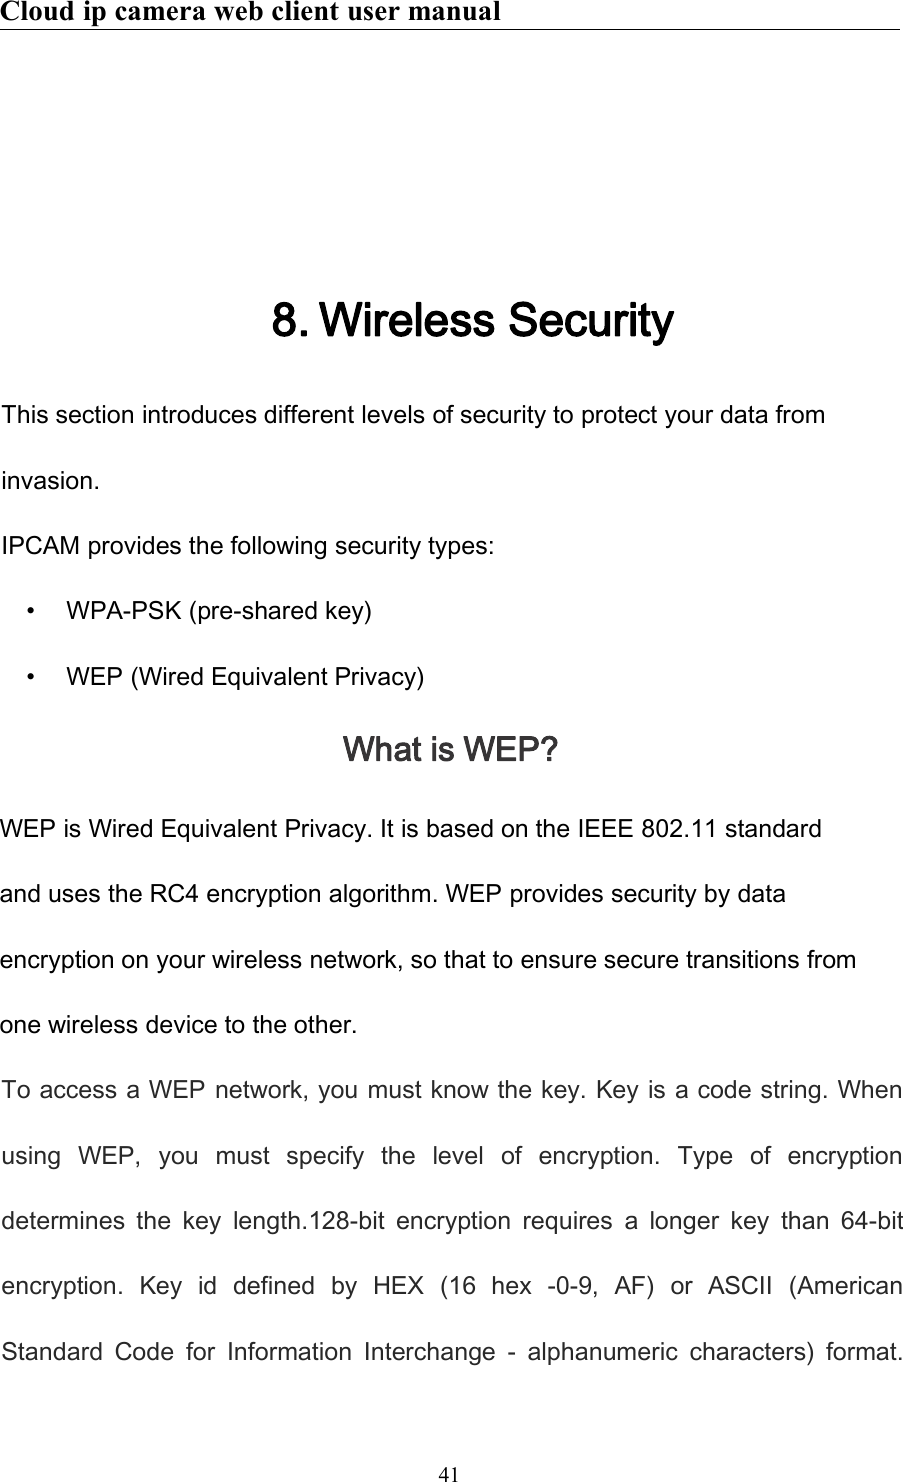 Cloud ip camera web client user manual418. Wireless SecurityThis section introduces different levels of security to protect your data frominvasion.IPCAM provides the following security types:• WPA-PSK (pre-shared key)• WEP (Wired Equivalent Privacy)What is WEP?WEP is Wired Equivalent Privacy. It is based on the IEEE 802.11 standardand uses the RC4 encryption algorithm. WEP provides security by dataencryption on your wireless network, so that to ensure secure transitions fromone wireless device to the other.To access a WEP network, you must know the key. Key is a code string. Whenusing WEP, you must specify the level of encryption. Type of encryptiondetermines the key length.128-bit encryption requires a longer key than 64-bitencryption. Key id defined by HEX (16 hex -0-9, AF) or ASCII (AmericanStandard Code for Information Interchange - alphanumeric characters) format.